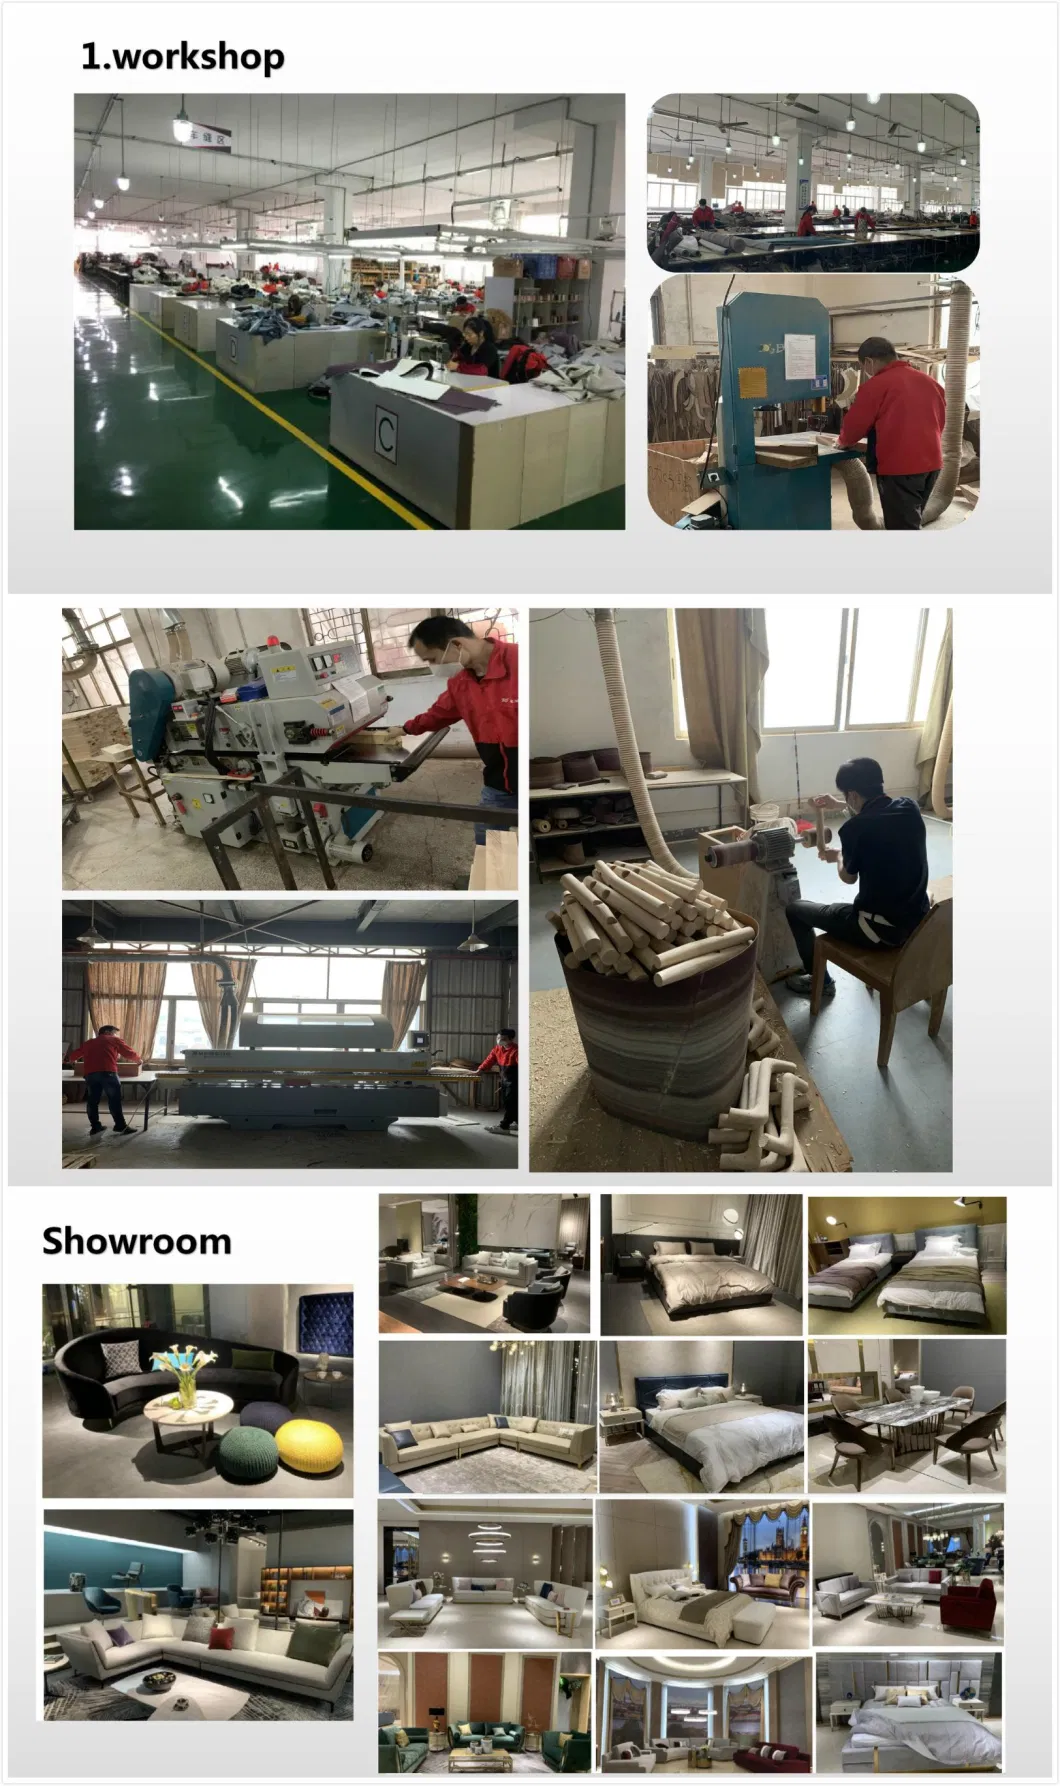 China Hotel Furniture Manufacturers Set for Cheap Bedroom Furniture